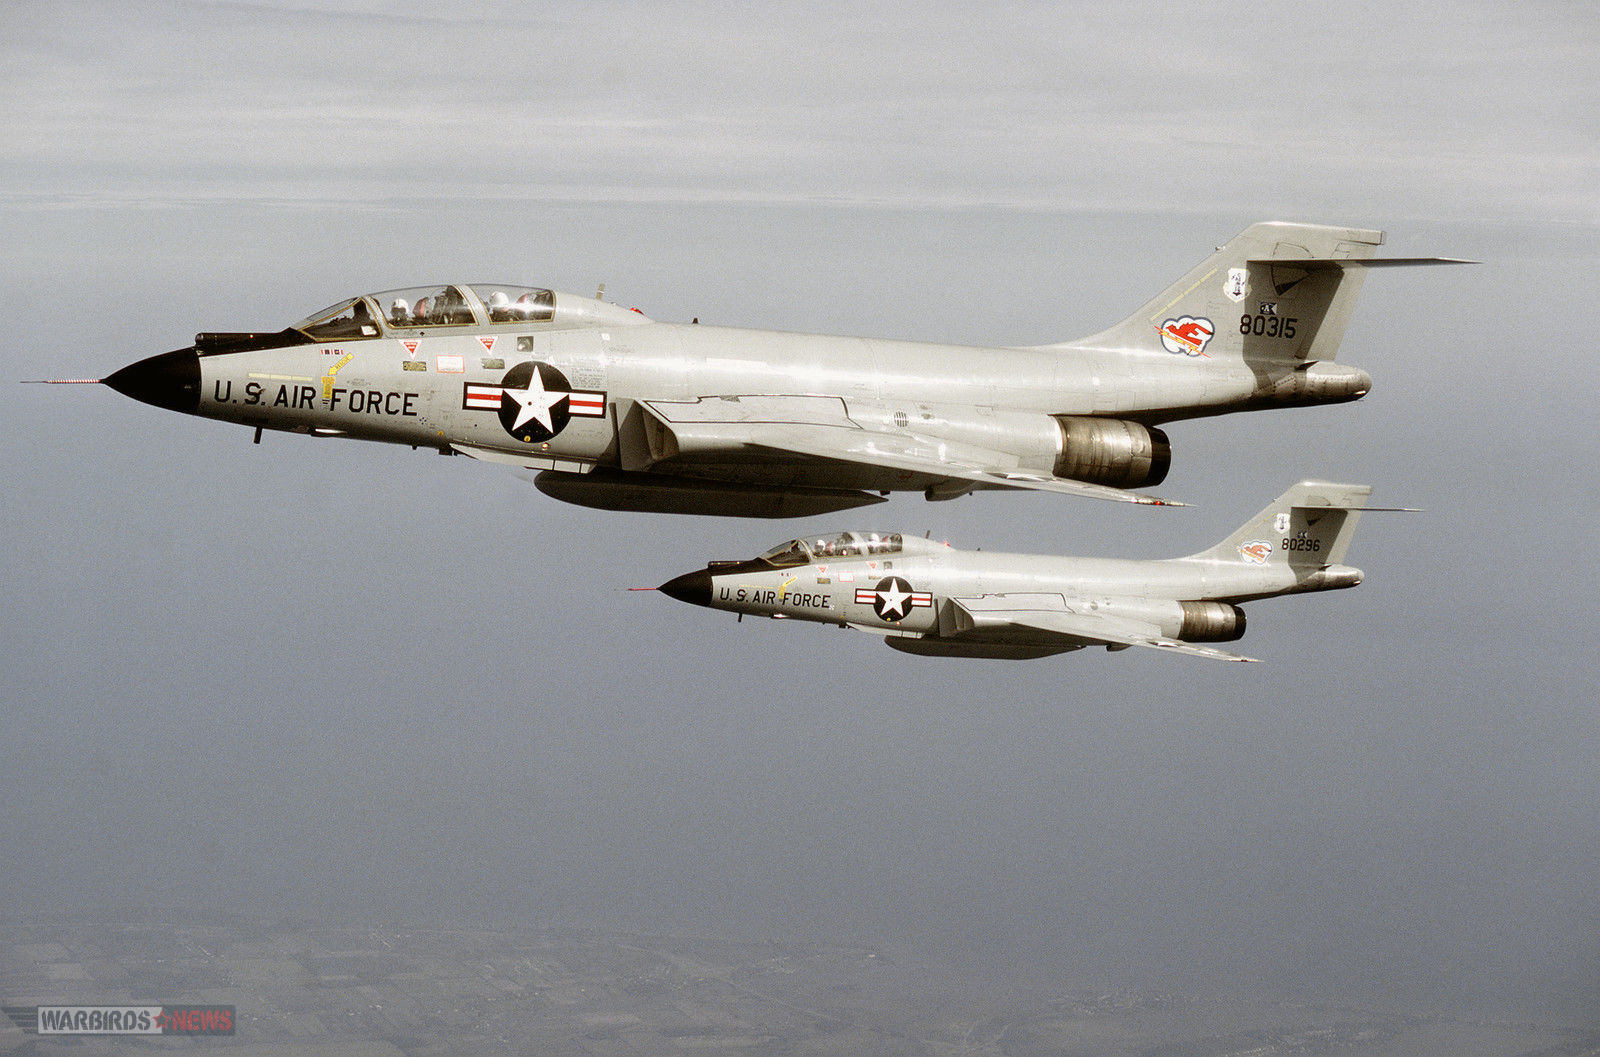 McDonnell F-101 Voodoo Backgrounds on Wallpapers Vista